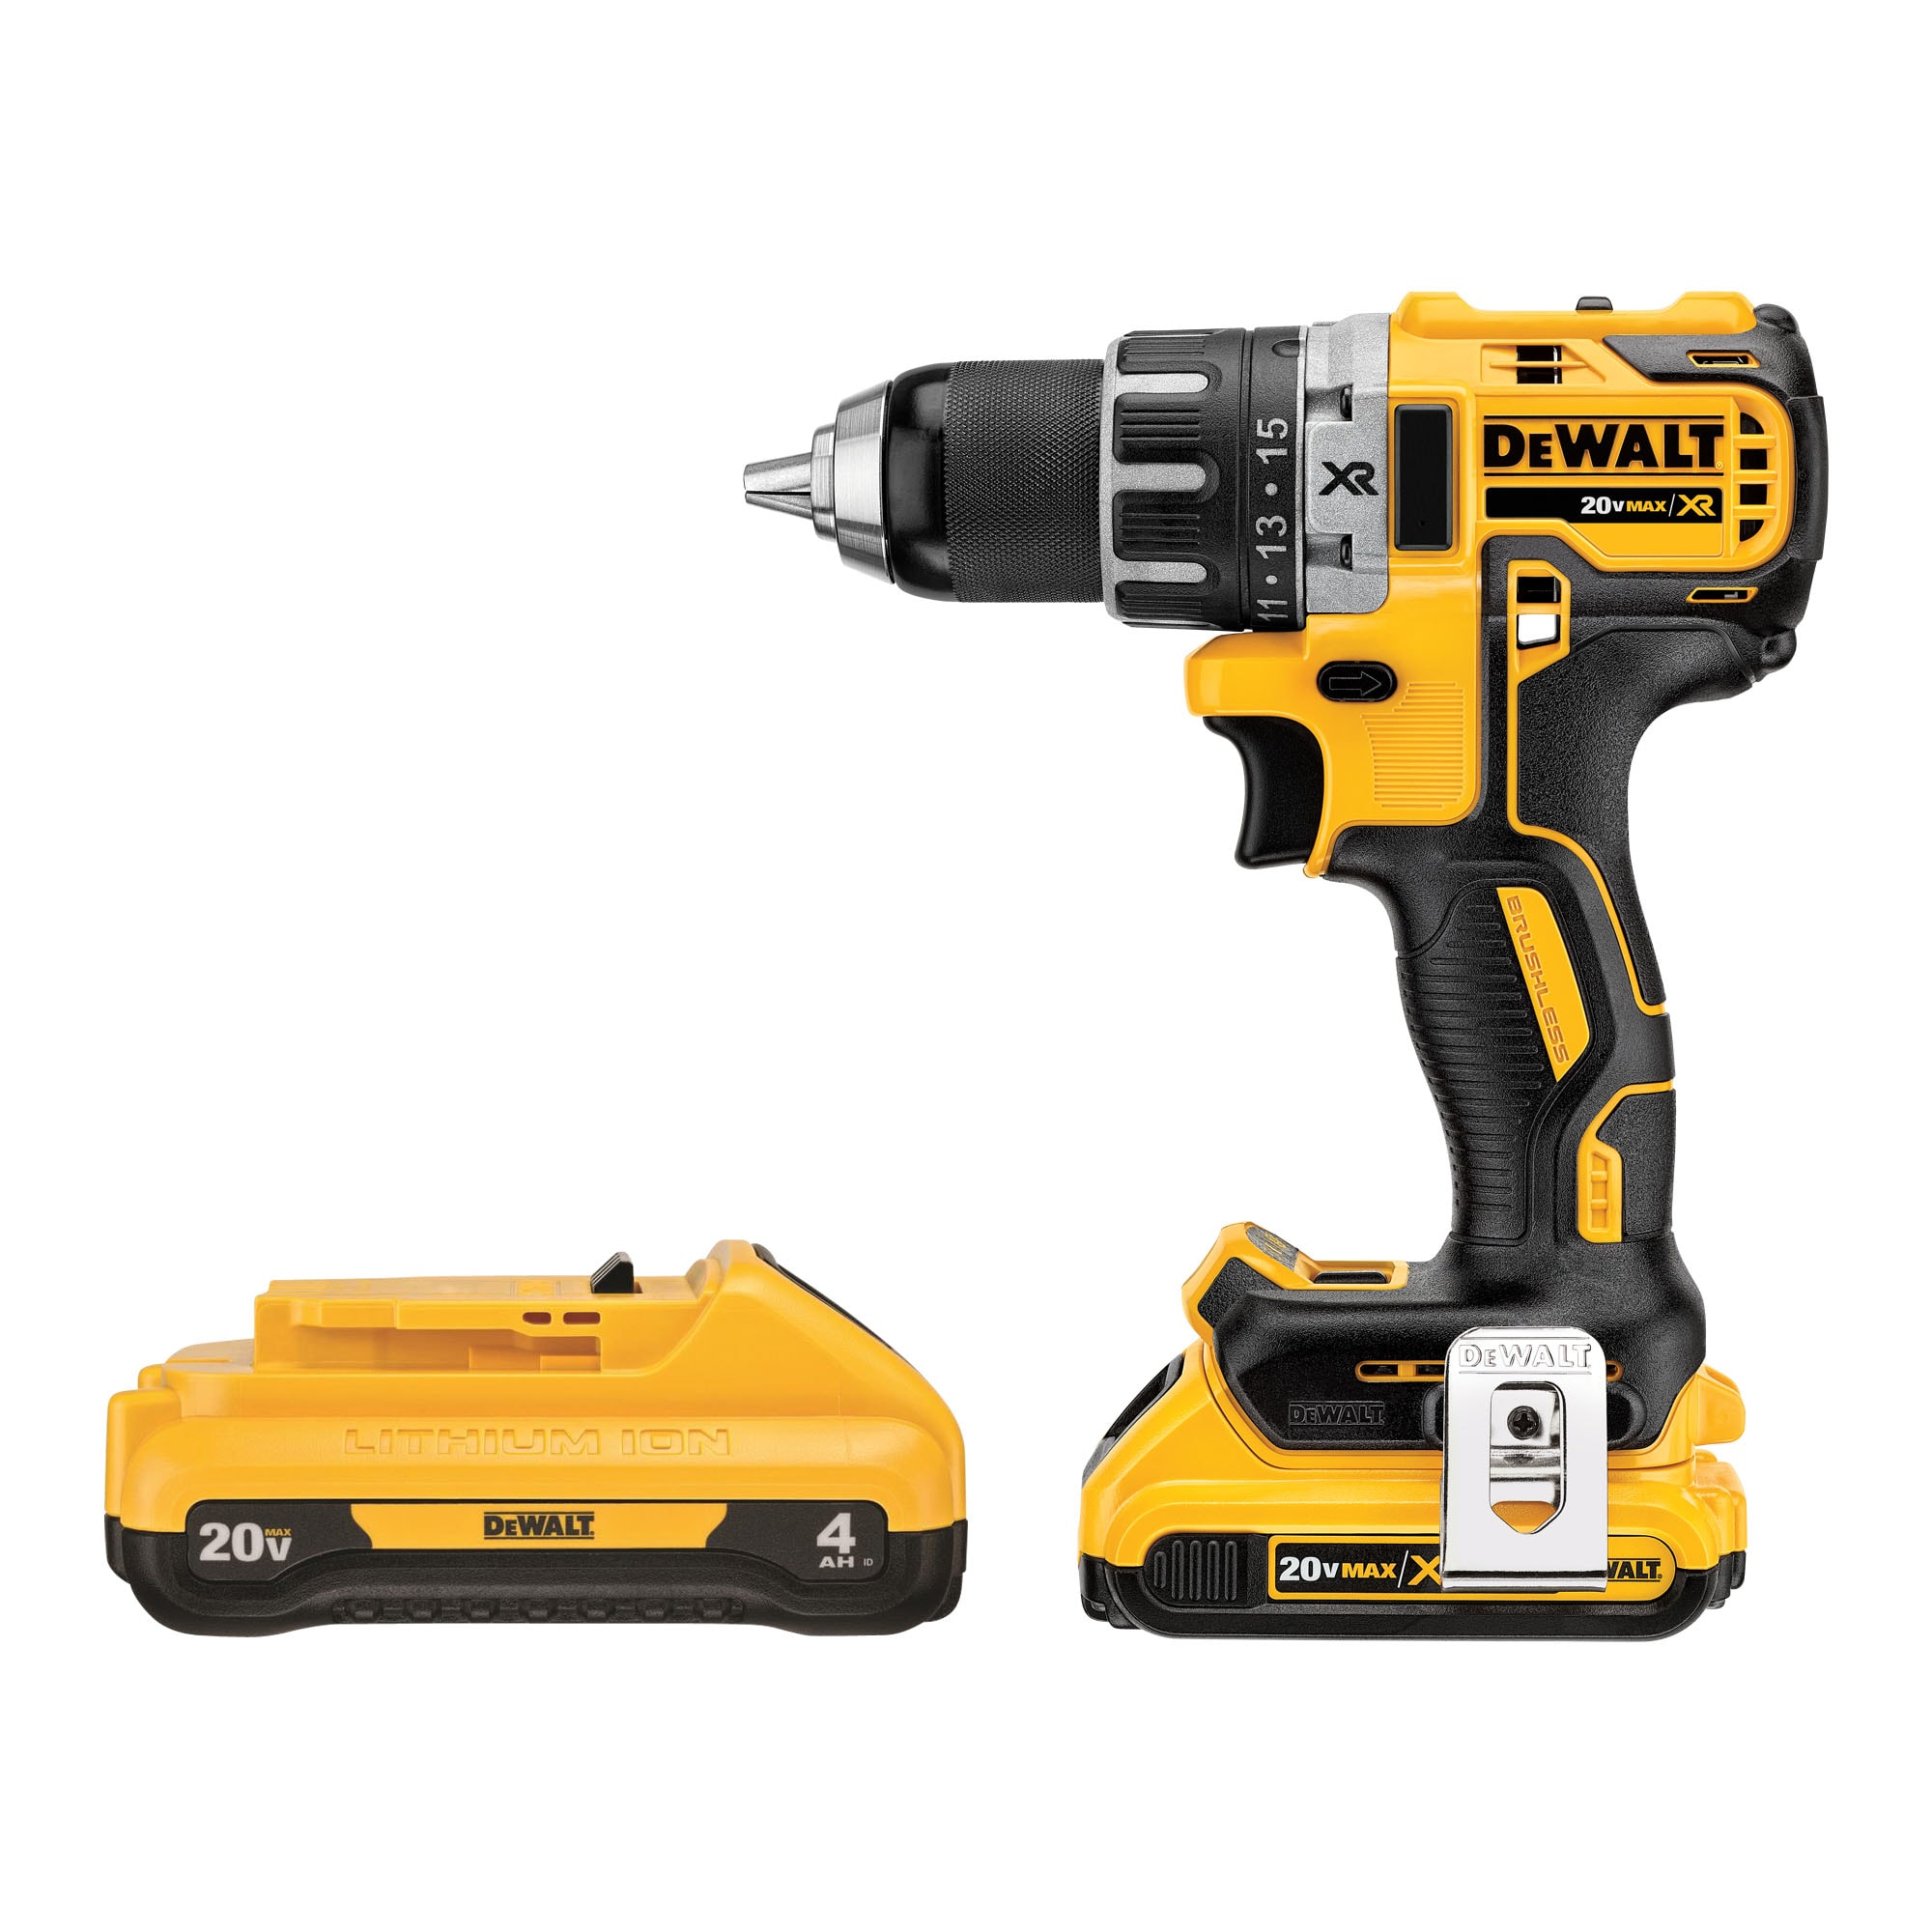 DEWALT XR 20-volt 1/2-in Brushless Cordless Drill (2-Batteries Included and Charger Included) & 20-Volt Max 4 Amp-Hour Lithium Power Tool Battery